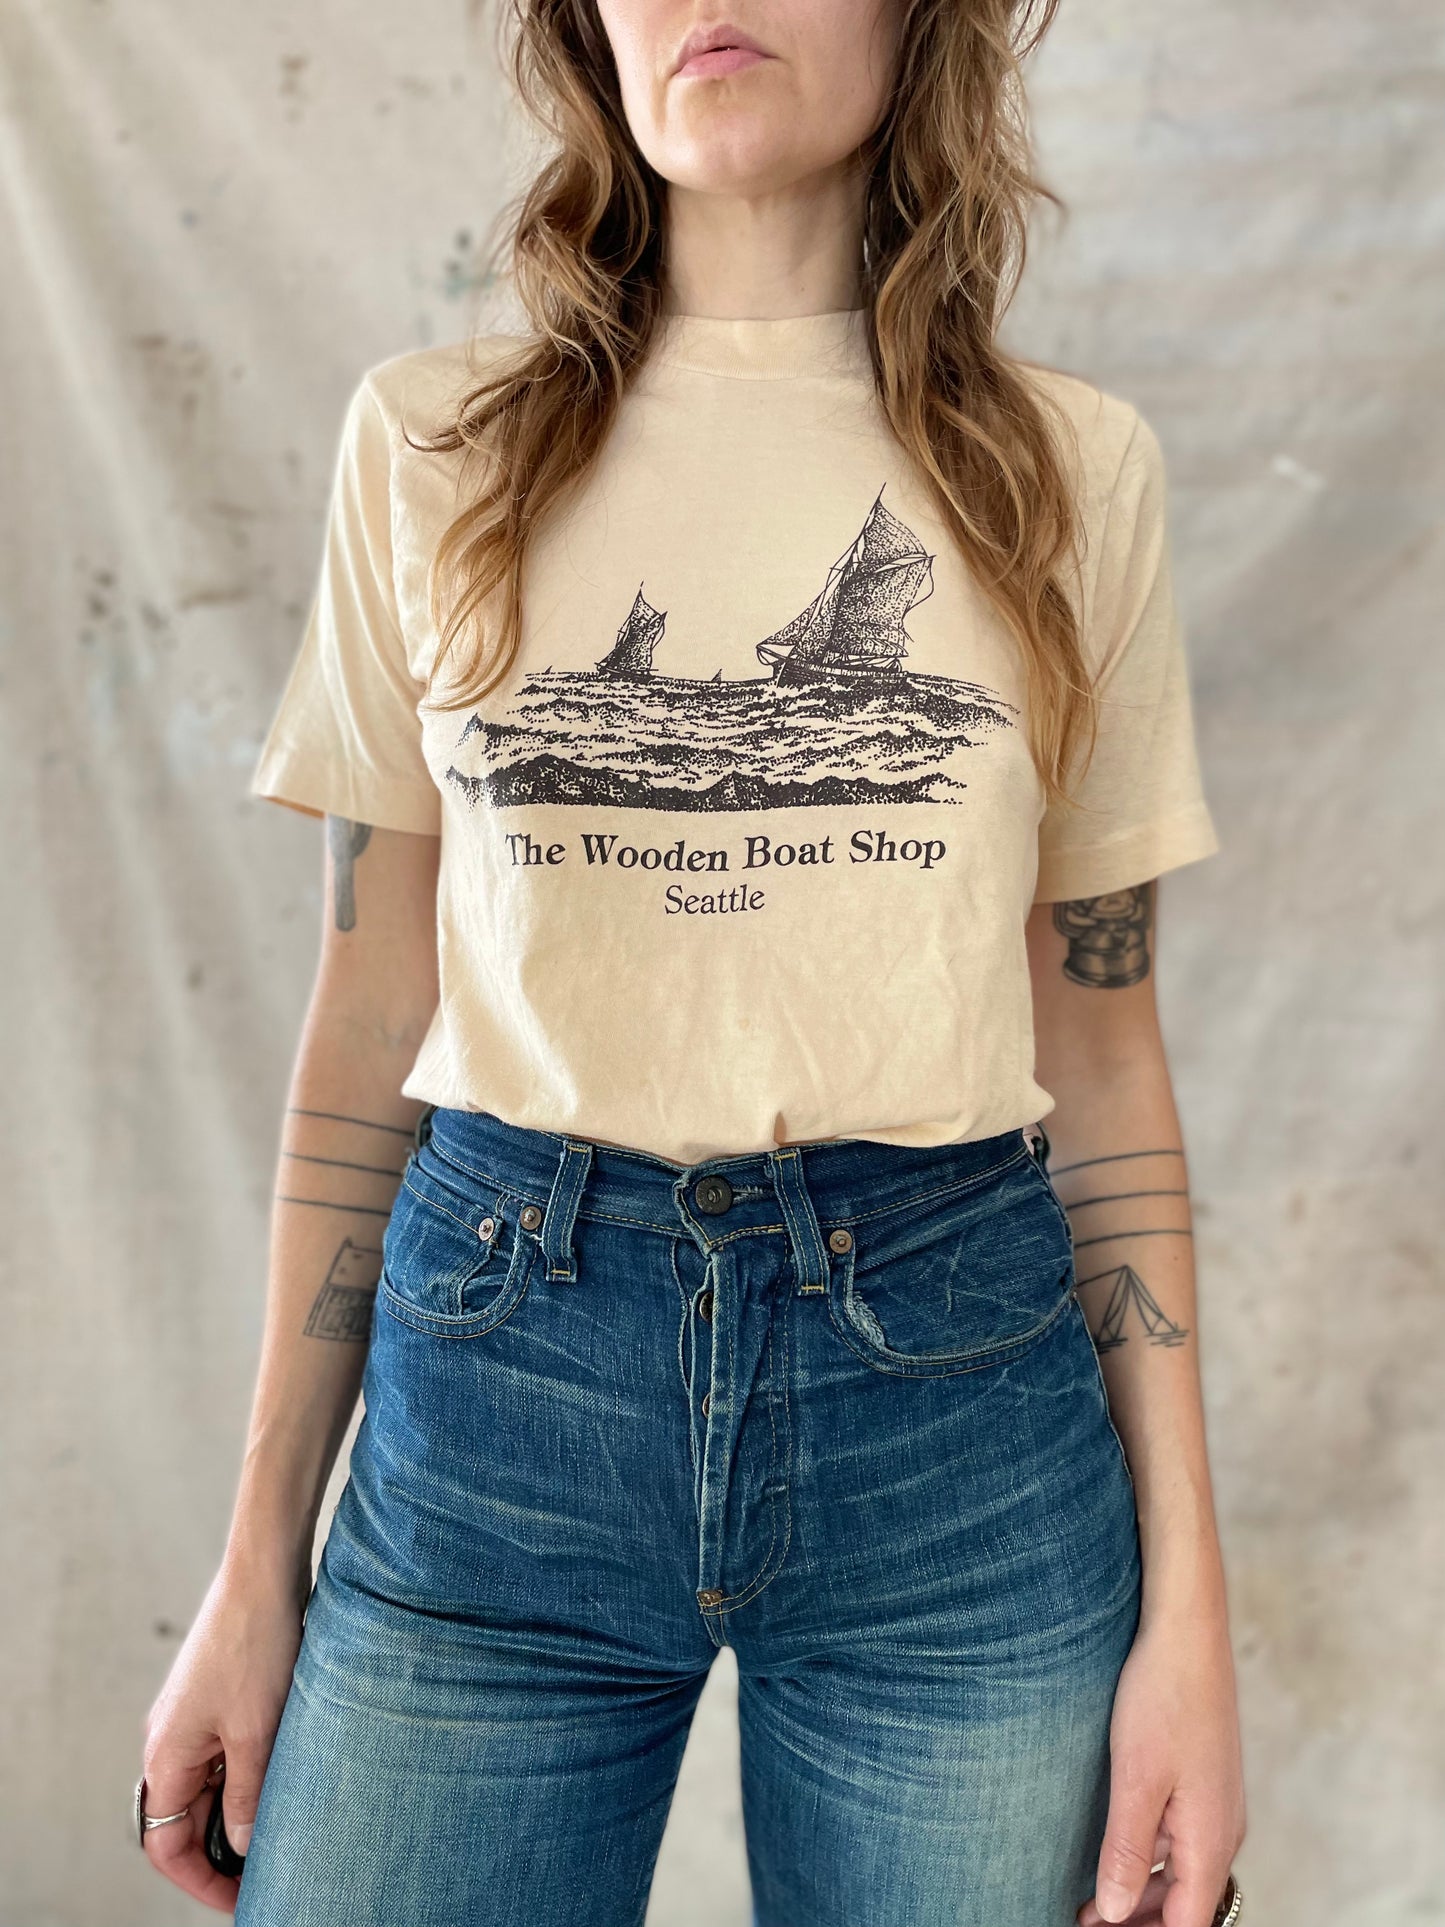 70s The Wooden Boat Shop, Seattle Tee